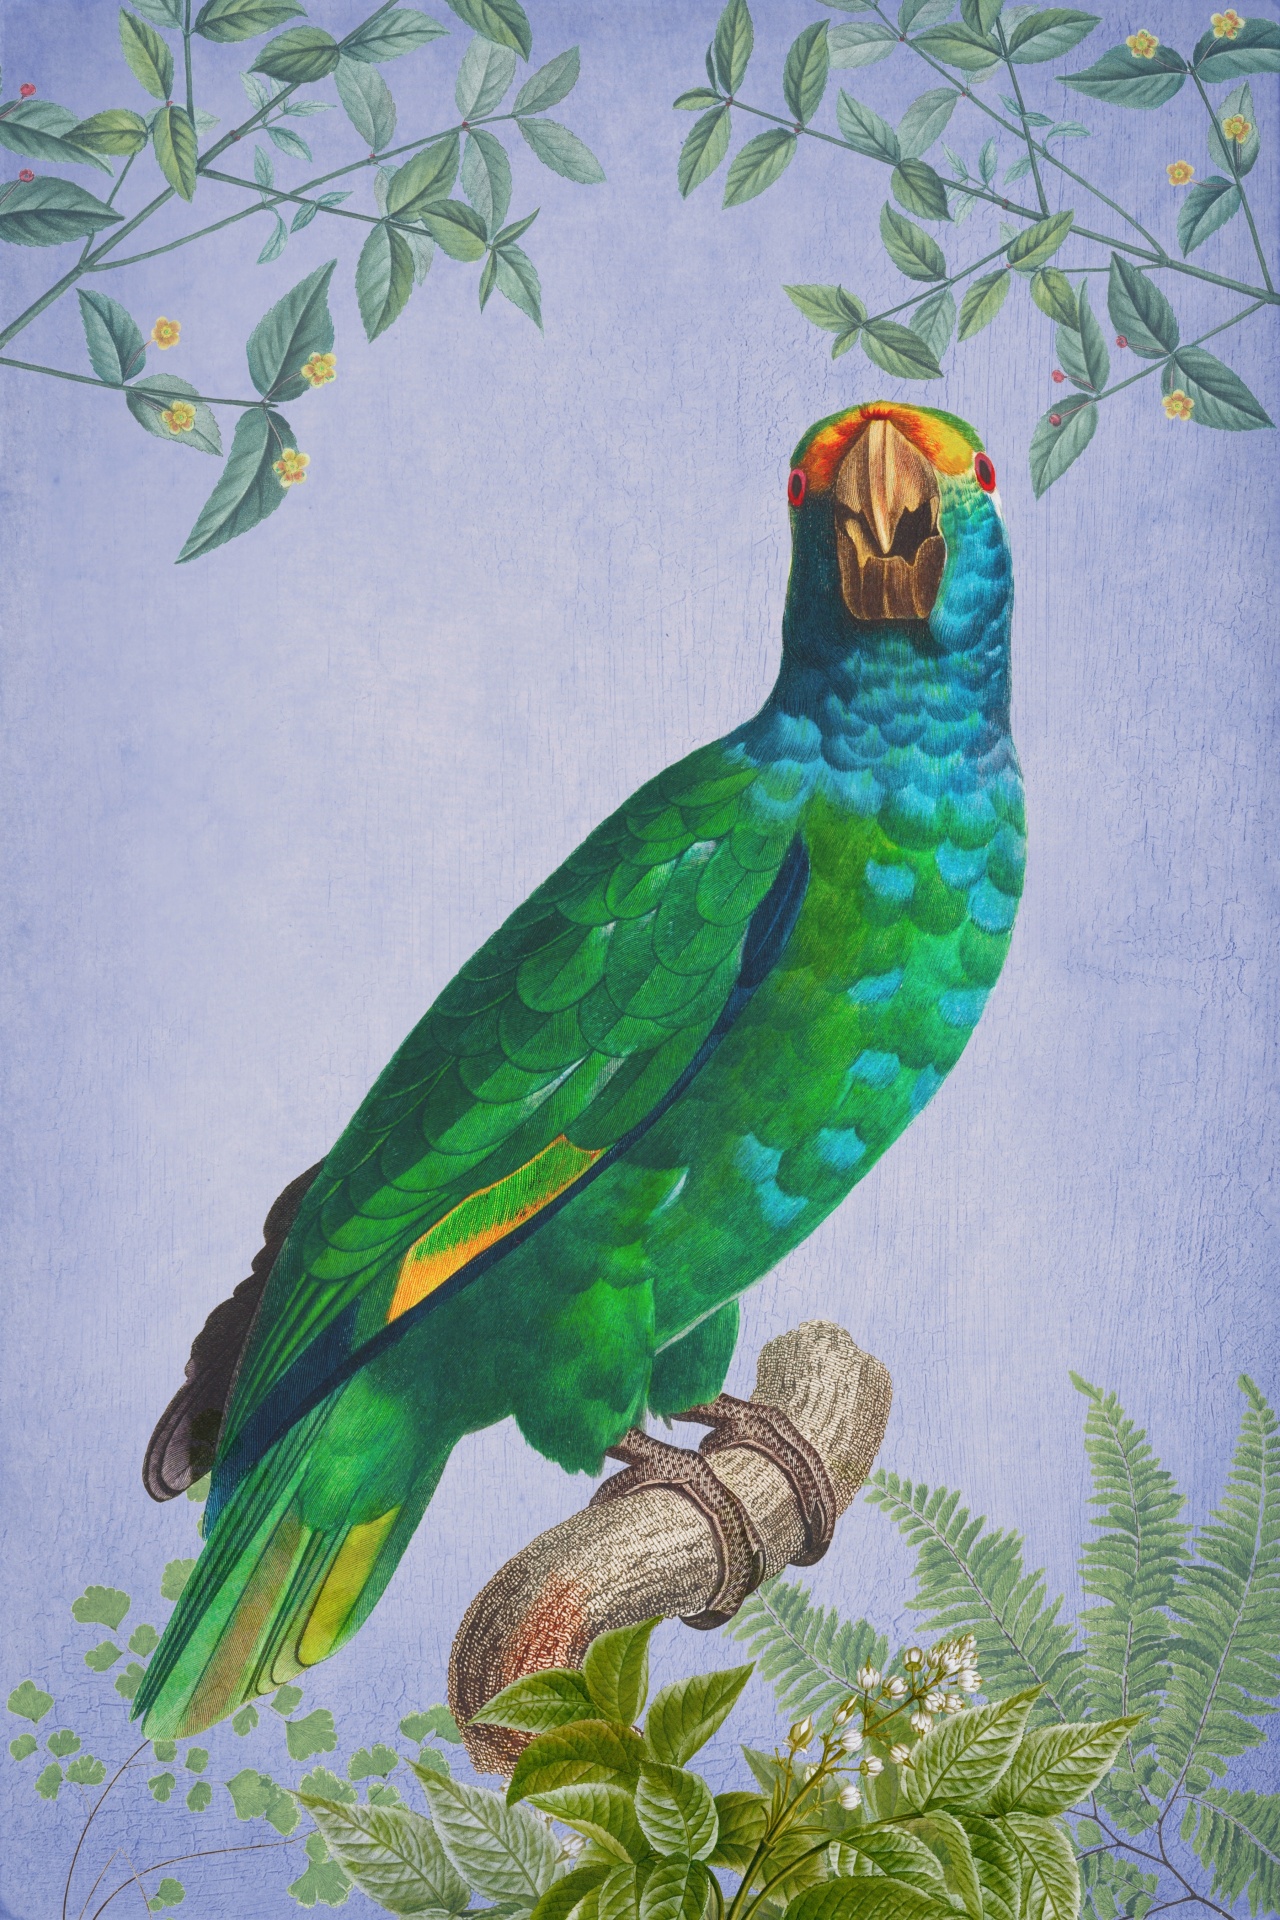 Parrot amazon bird flowers branches vintage art poster collage diverse clipart on old paper with blue background